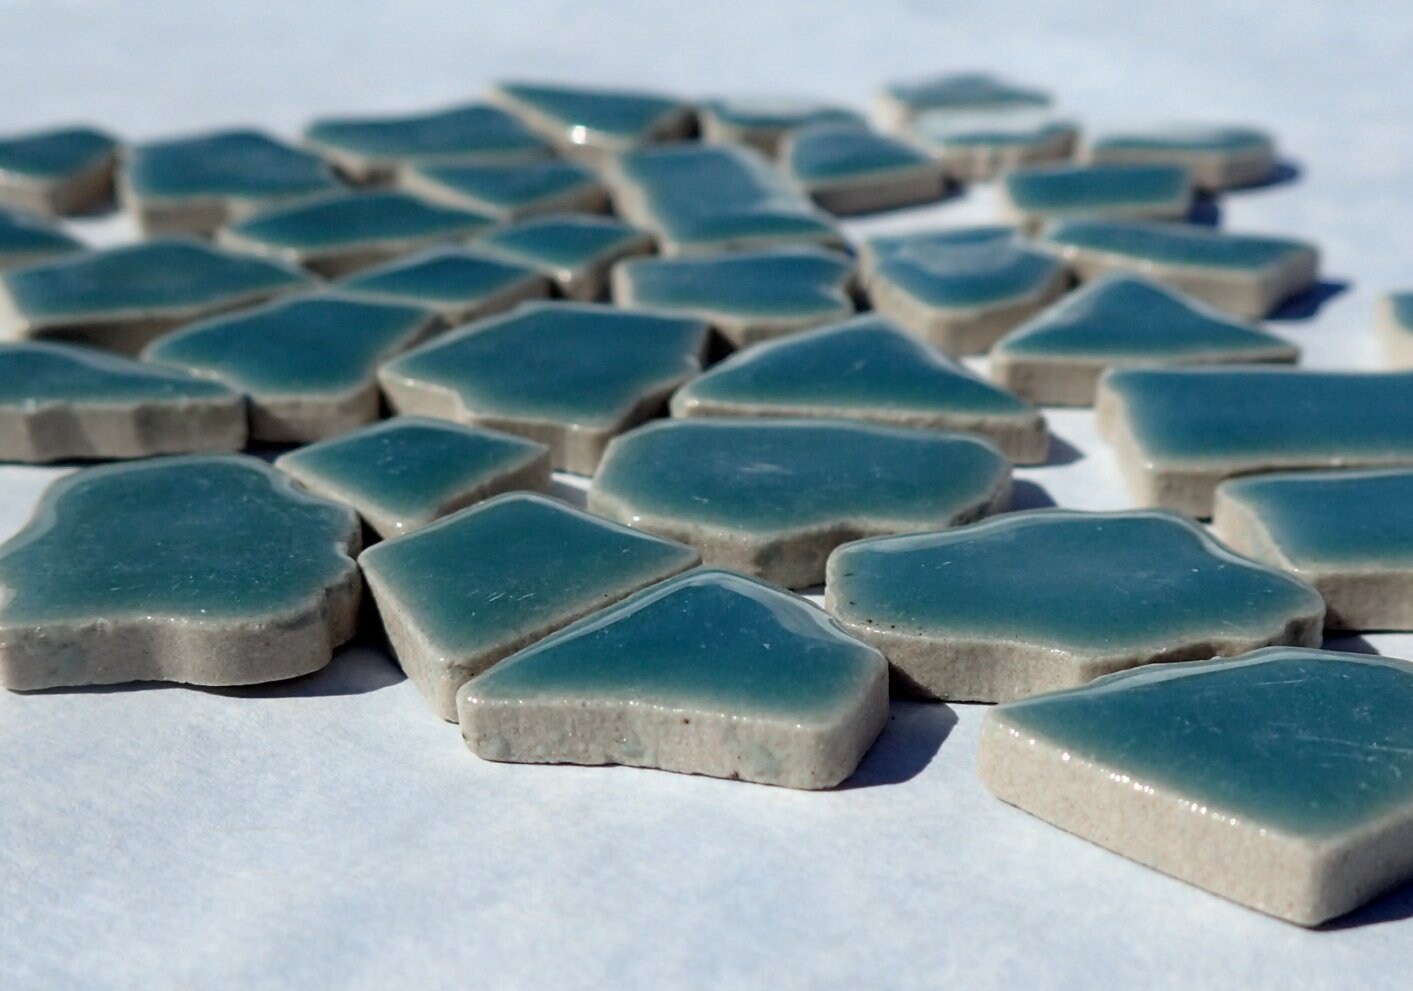 Sea Green Mosaic Ceramic Tiles - Jigsaw Puzzle Shaped Pieces - Half Pound - Assorted Sizes Random Shapes in Phthalo Green